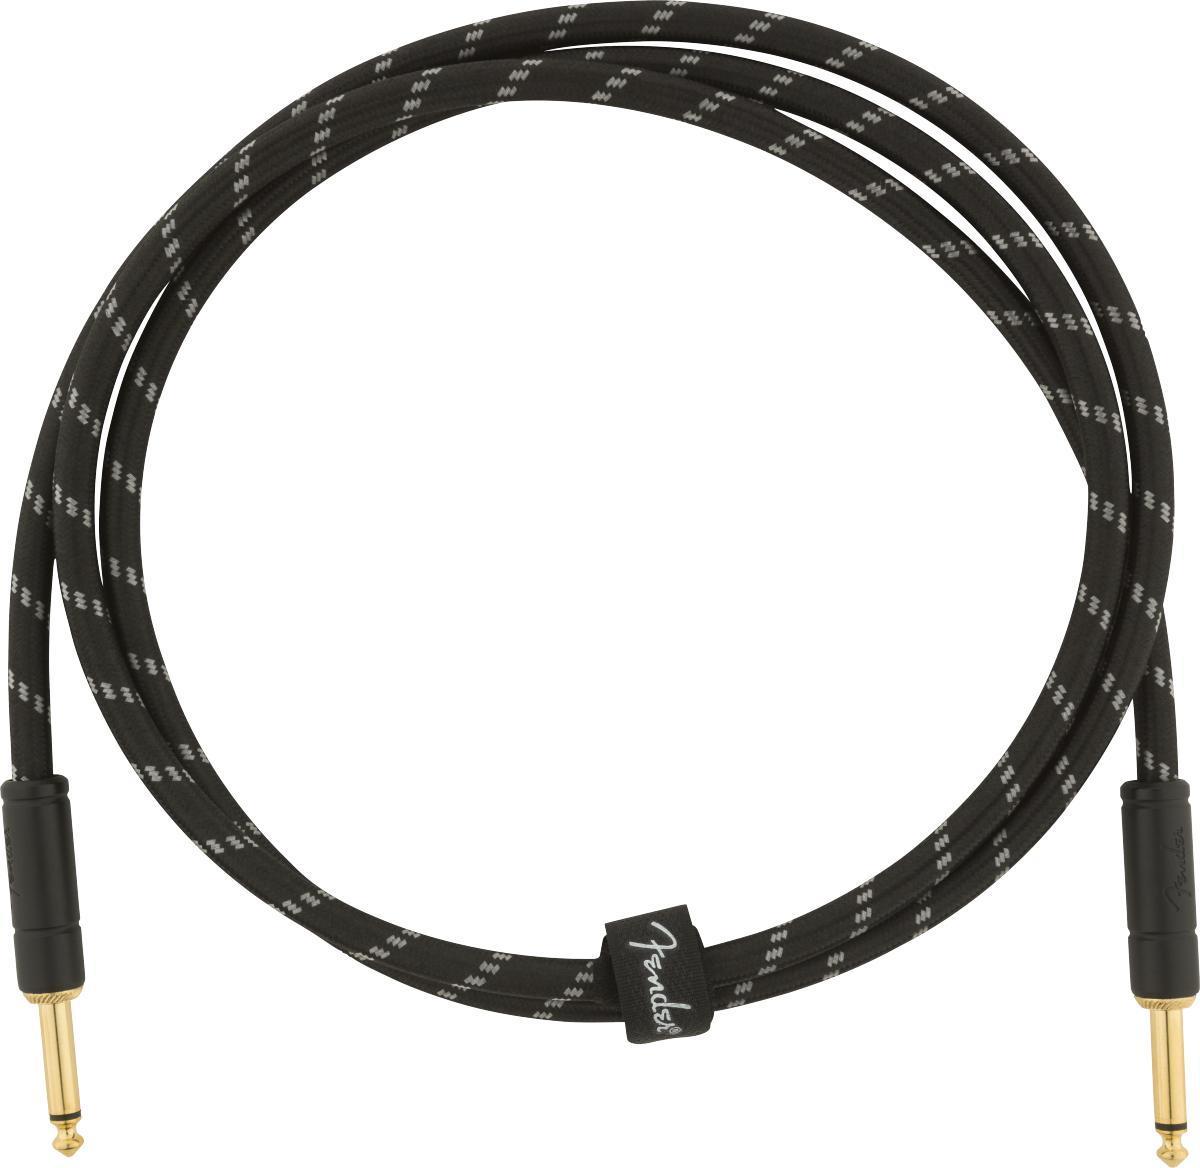 Cable Fender Deluxe Instrument Cable, 5ft, Straight/Straight - Black Tweed